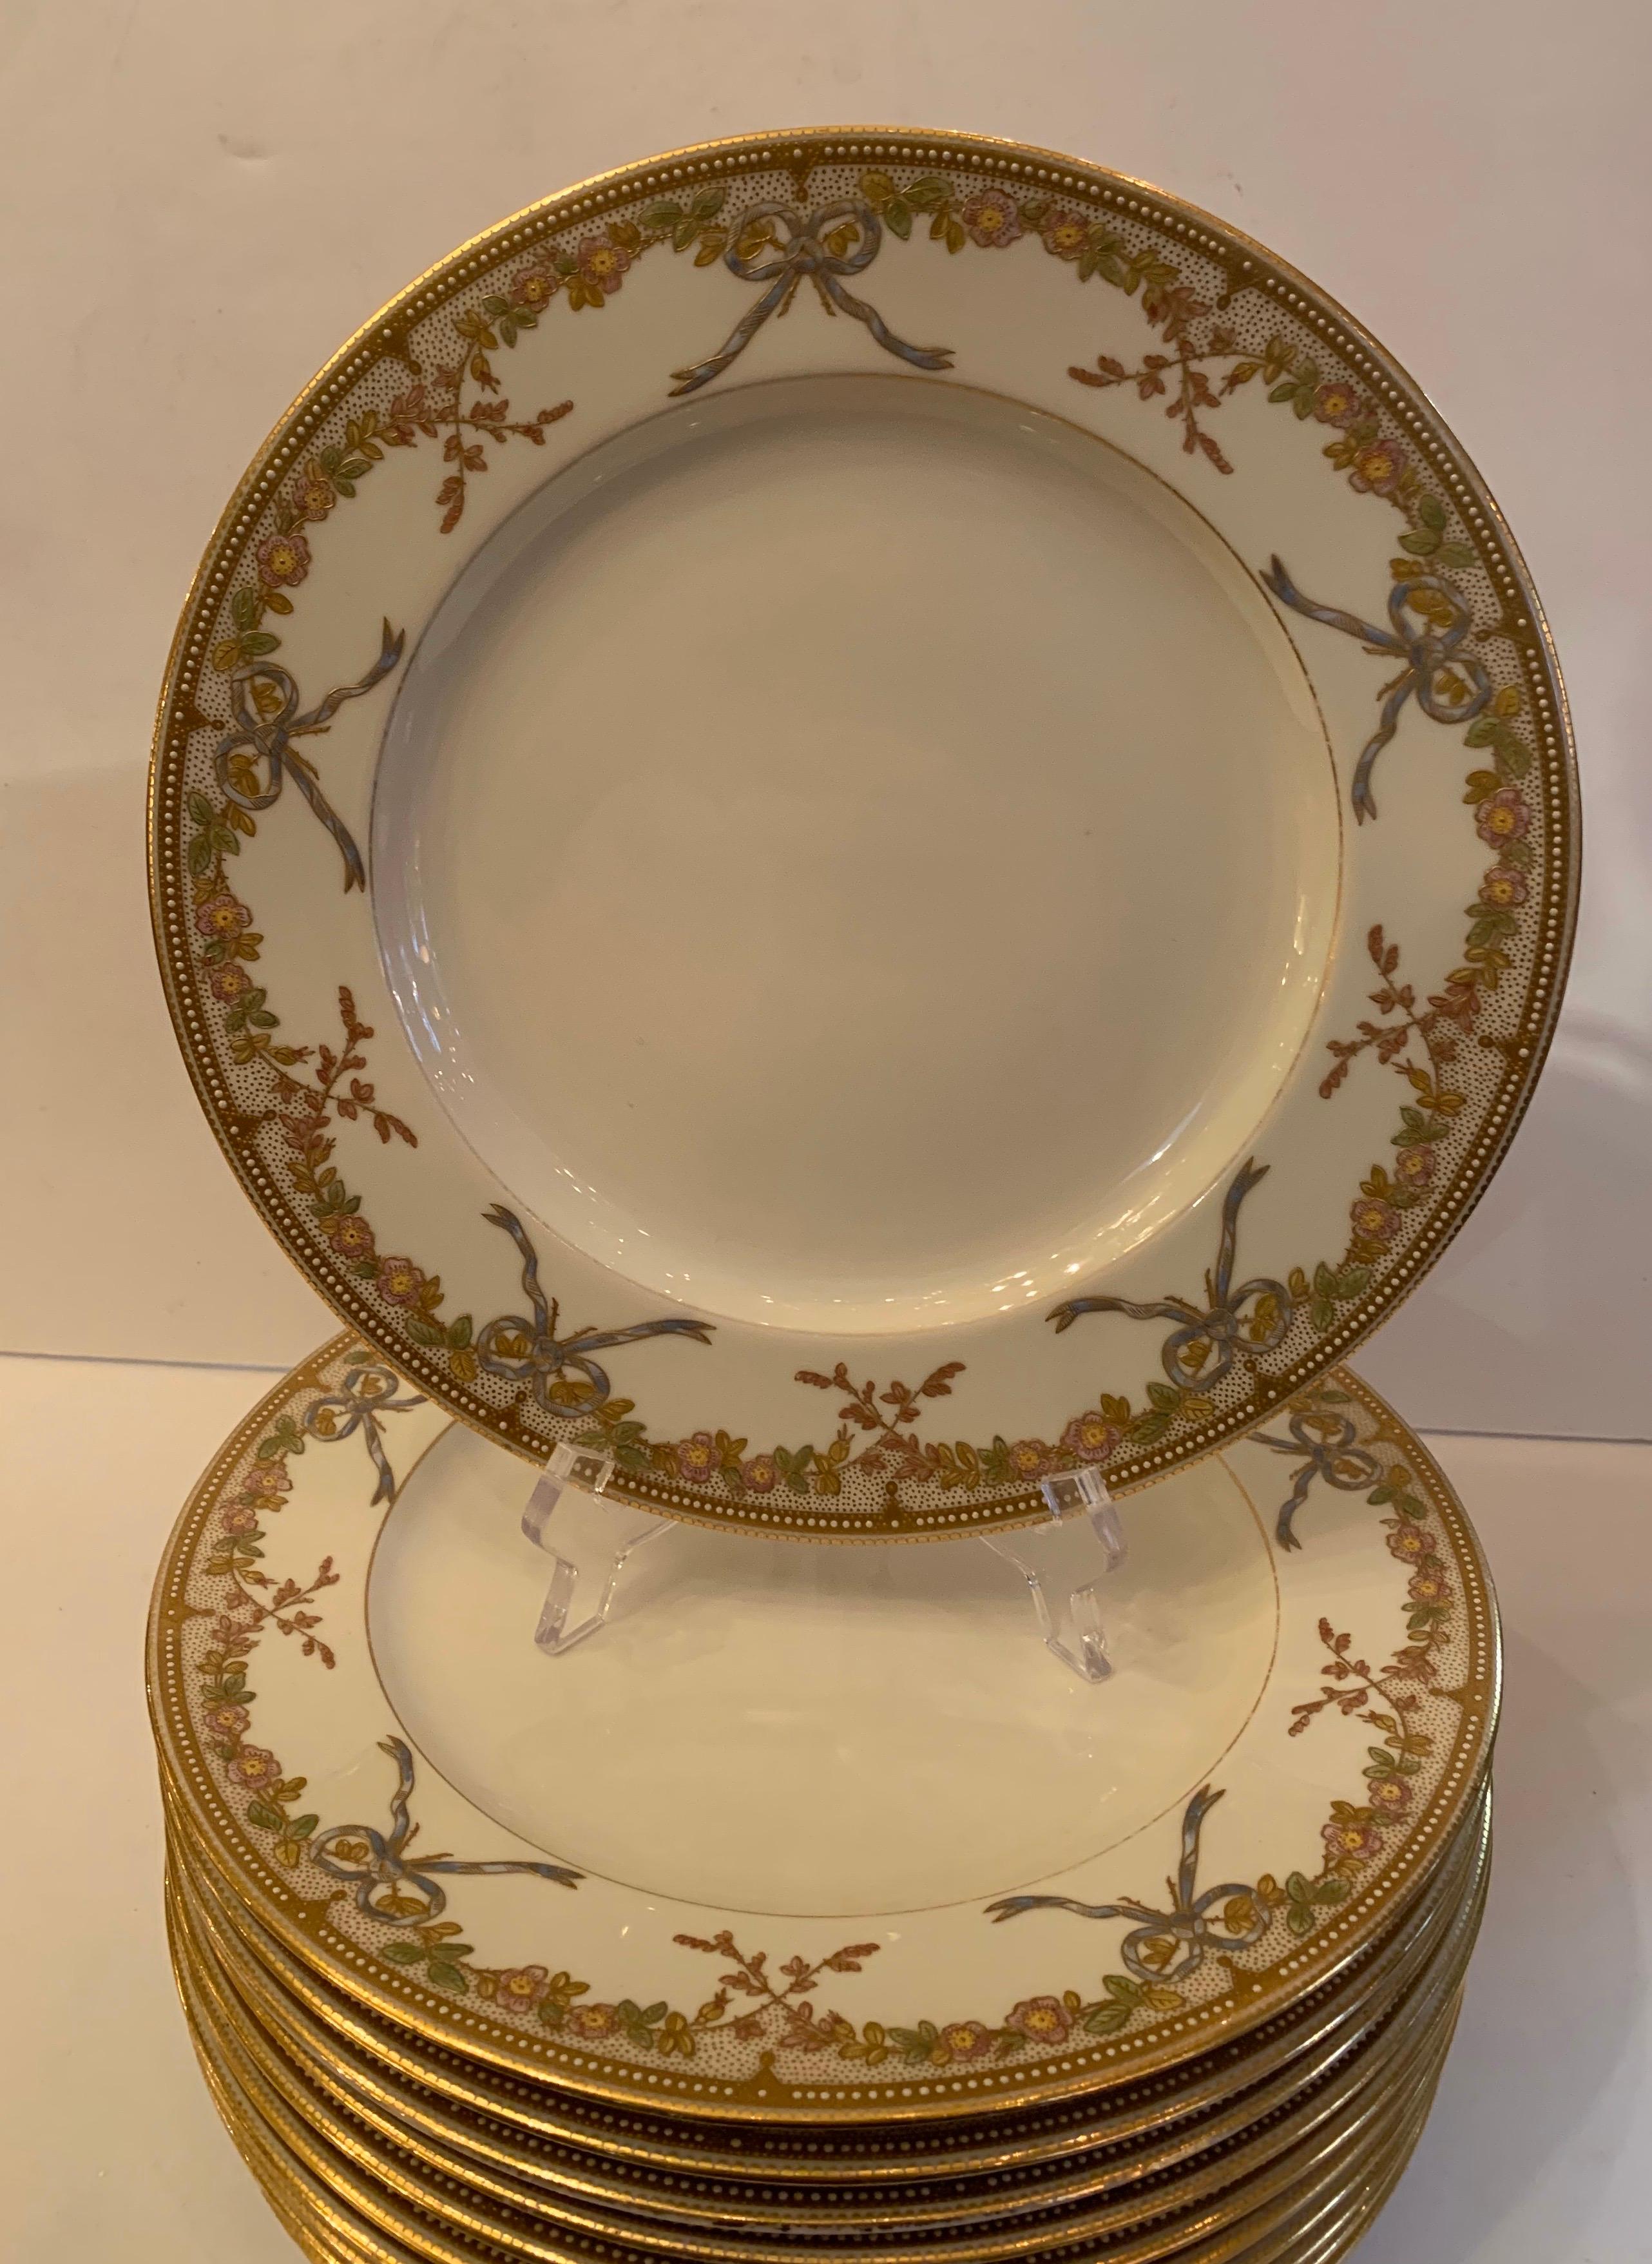 A wonderful service for 11 hand painted porcelain Copeland raised bows and flowers dinner plates
On the back:
A. B. Daniels & Son
46 Wigmore St.
London W
Copeland China.